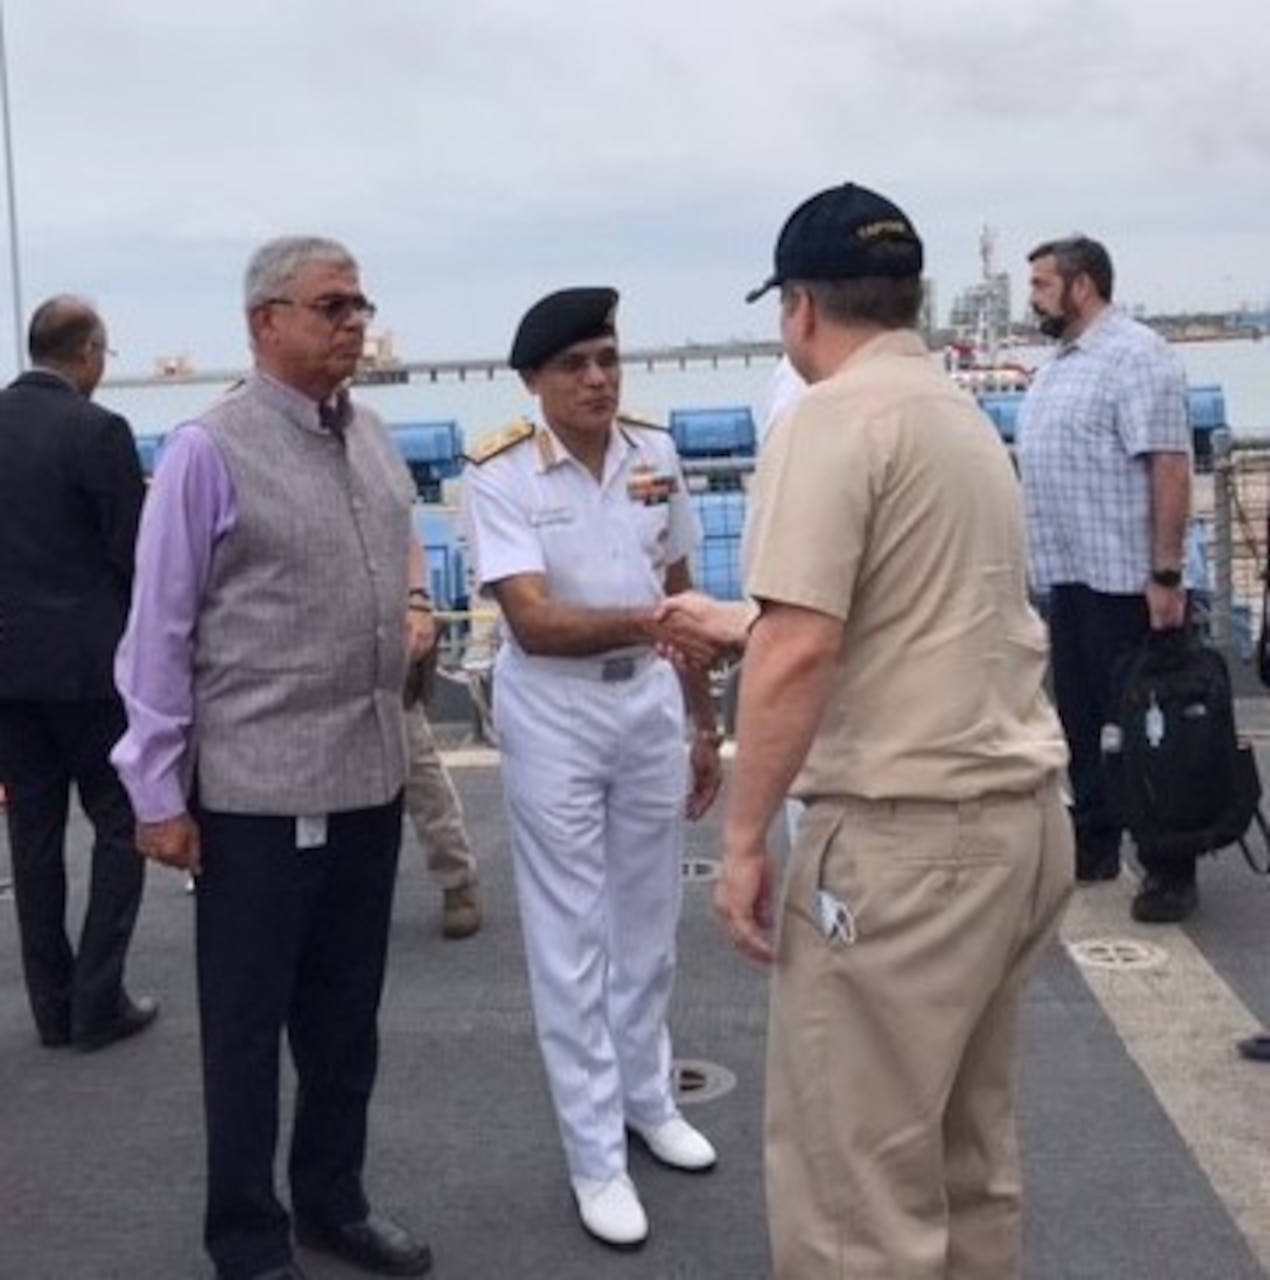 CHENNAI, INDIA (Aug. 7, 2022) – From left, L&T Shipbuilding Head, Shipyard and Program Management, P.R. Raghunath and India’s Vice Chief of Naval Staff Vice Admiral S.N. Ghormade meet Capt. William Hartman, master of the Lewis and Clark-class dry cargo ship USNS Charles Drew (T-AKE-10), at L&T Shipyard in Kattupalli, near Chennai, India, Aug. 7, 2022 where the ship will conduct scheduled maintenance. As part of Military Sealift Command’s Combat Logistics Force (CLF), Charles Drew enables U.S. Navy ships to remain at sea and combat ready for extended periods of time.  In addition, CLF ships, like Charles Drew, also resupply international partners and allies operating in the Indo-Pacific Region.  Under Commander, U.S. Pacific Fleet, 7th Fleet is the U.S. Navy's largest forward-deployed numbered fleet and routinely interacts and operates with 35 maritime nations in preserving a free and open Indo-Pacific Region. (Photo by Joel Garcia)